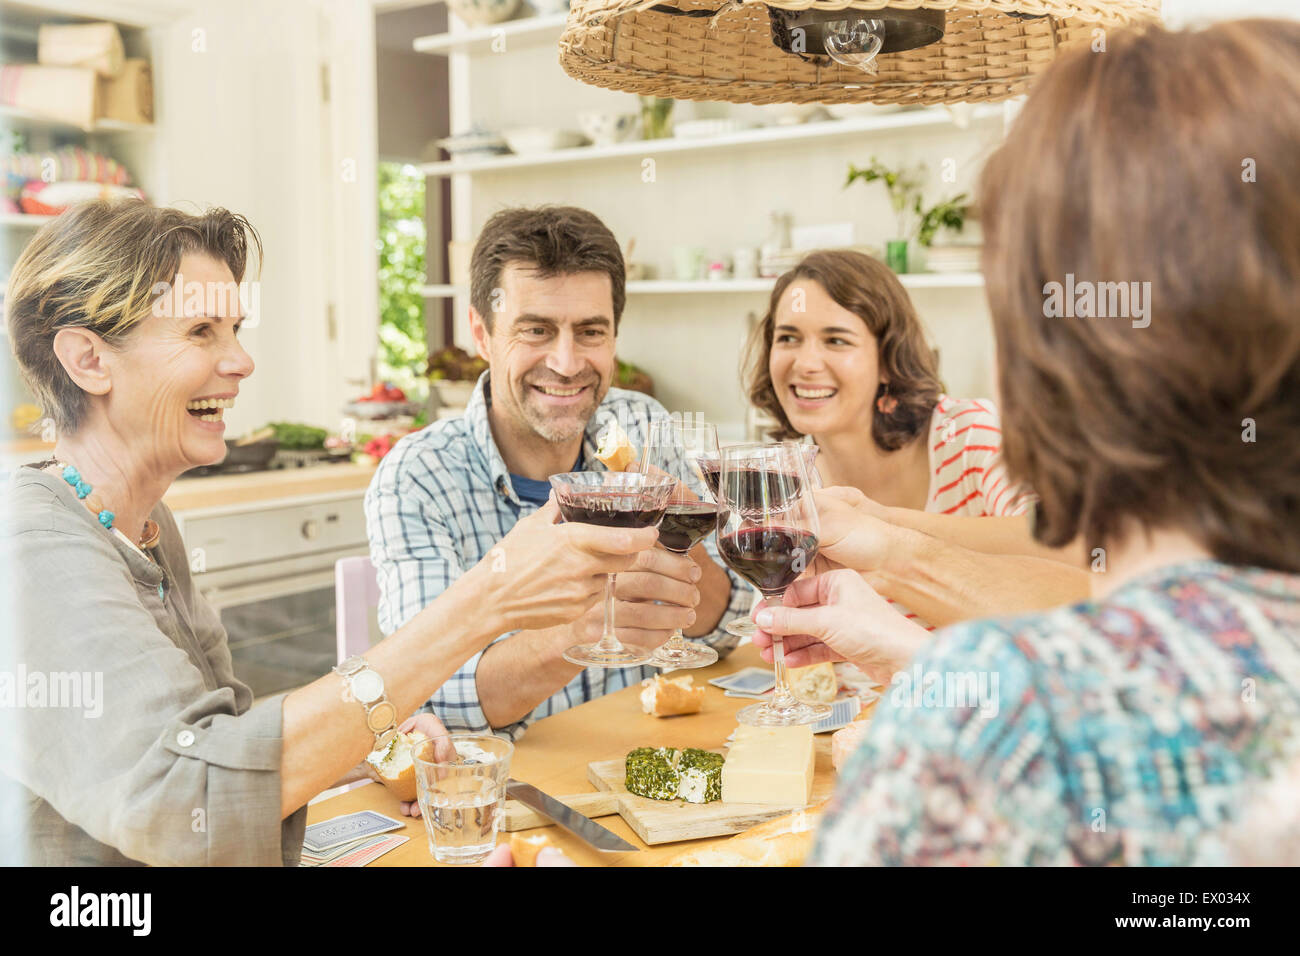 Adult friends making a toast with red wine at dining table Stock Photo